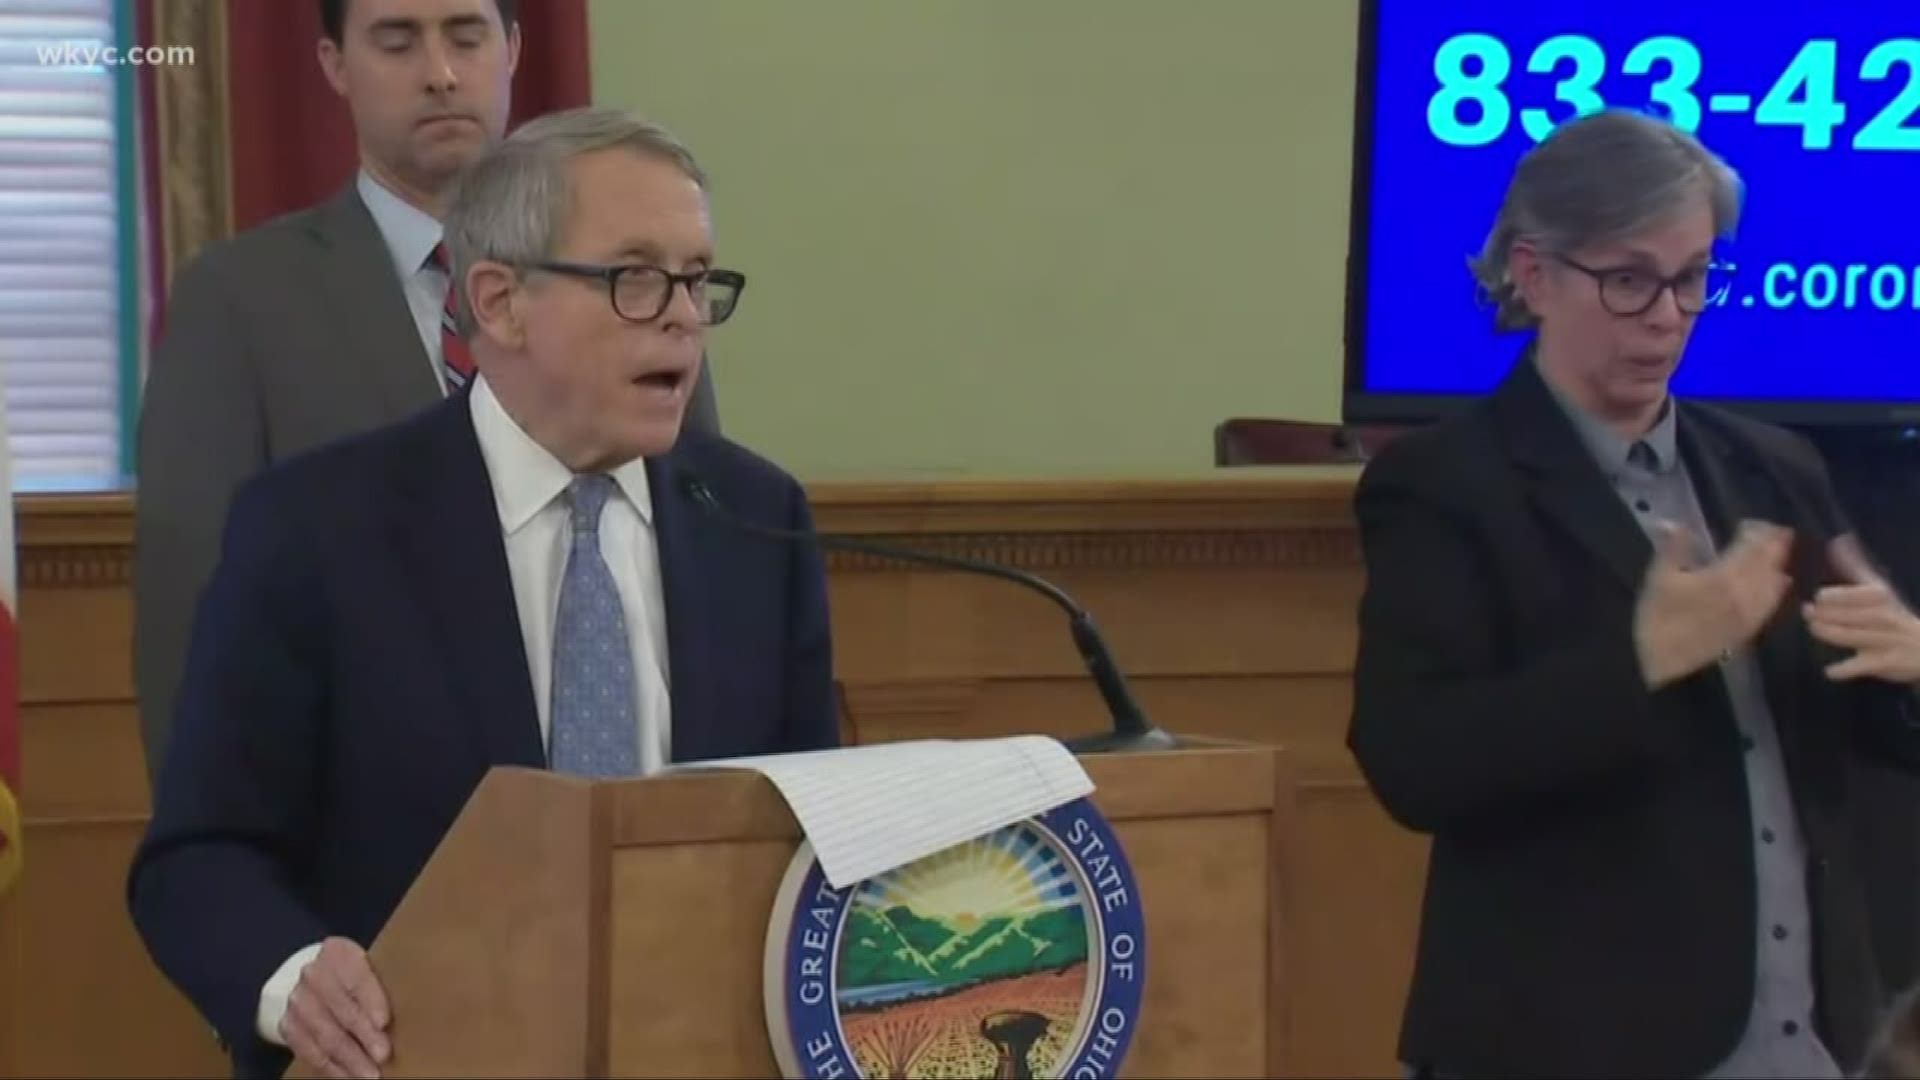 Citing concerns regarding COVID-19, Ohio Governor Mike DeWine has recommended that in-person voting for the Ohio Primary be delayed. Mark Naymik reports.